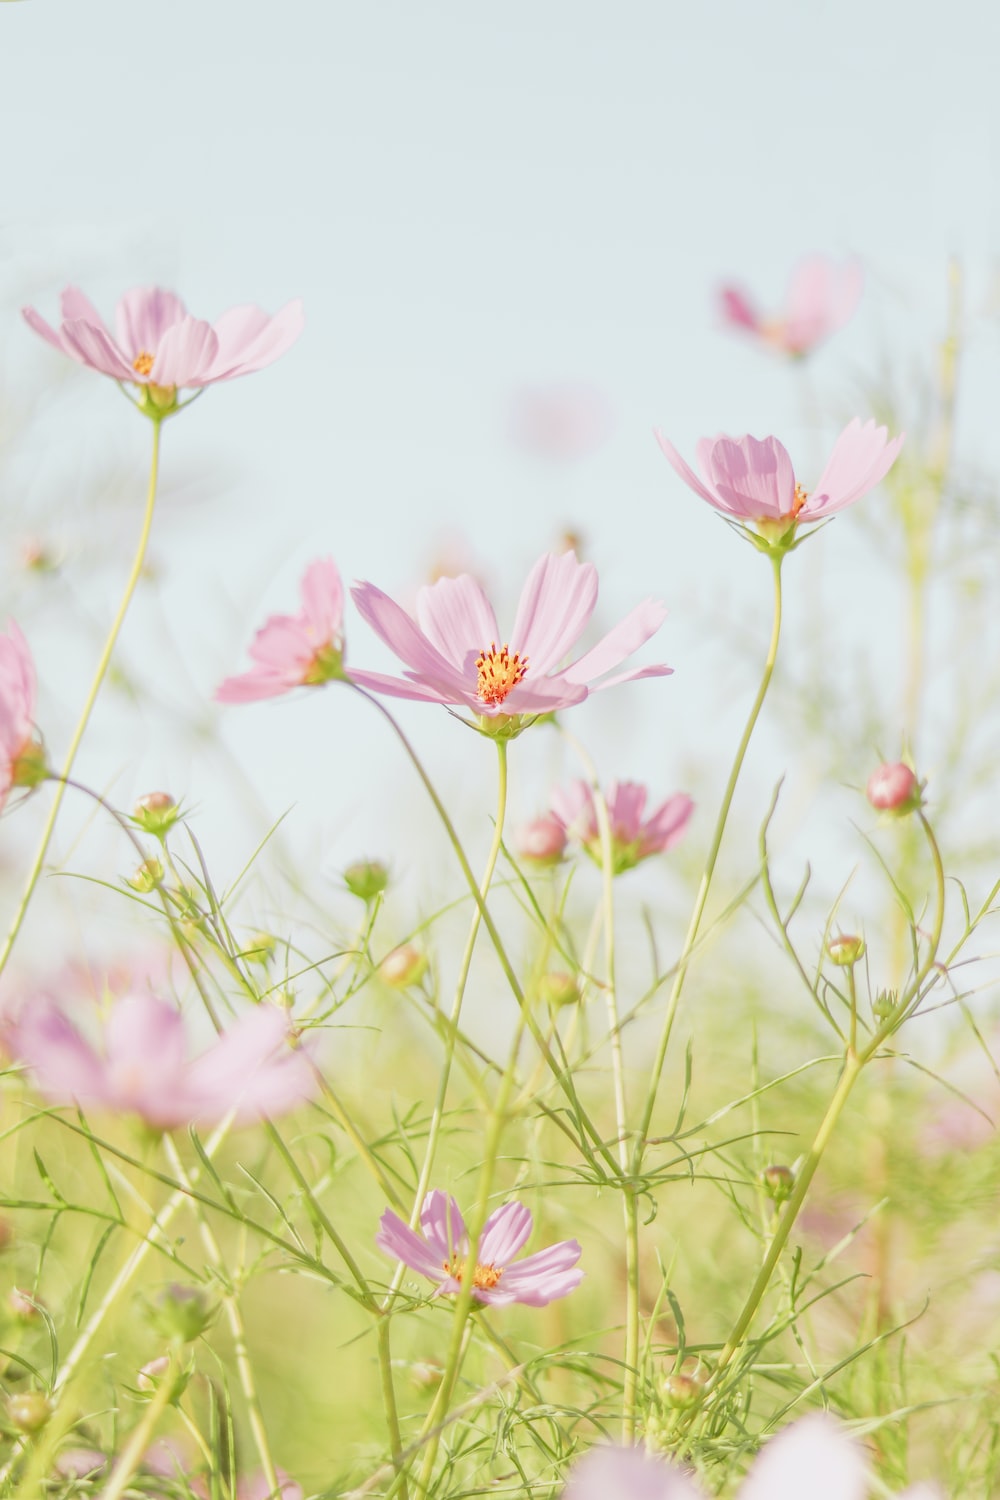 Spring Flowers Picture. Download Free Image